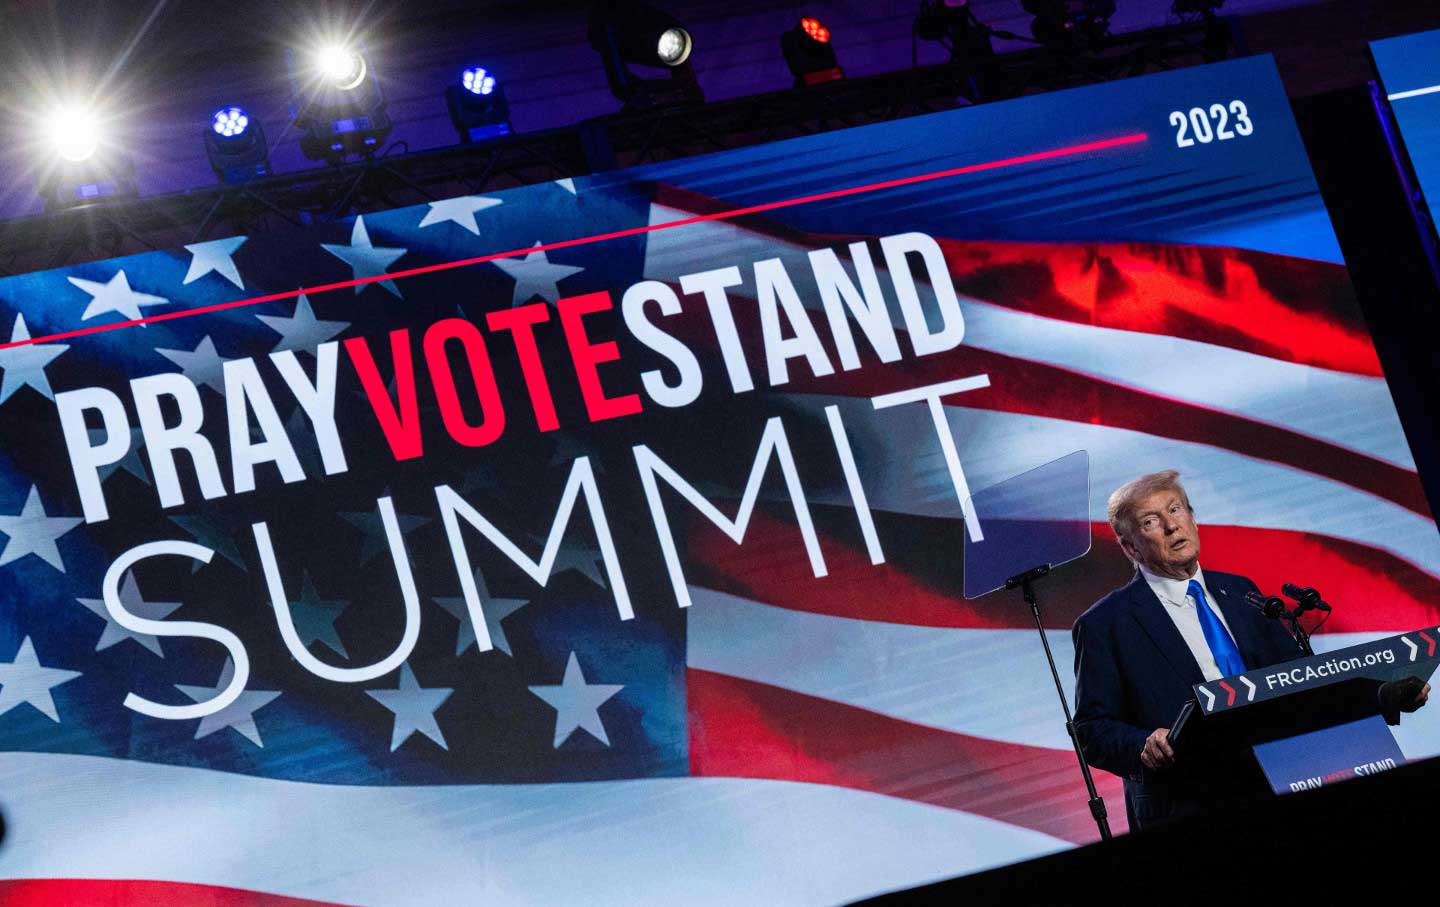 Former president Donald Trump speaks at the Pray Vote Stand summit in Washington, D.C,, on September 15, 2023.